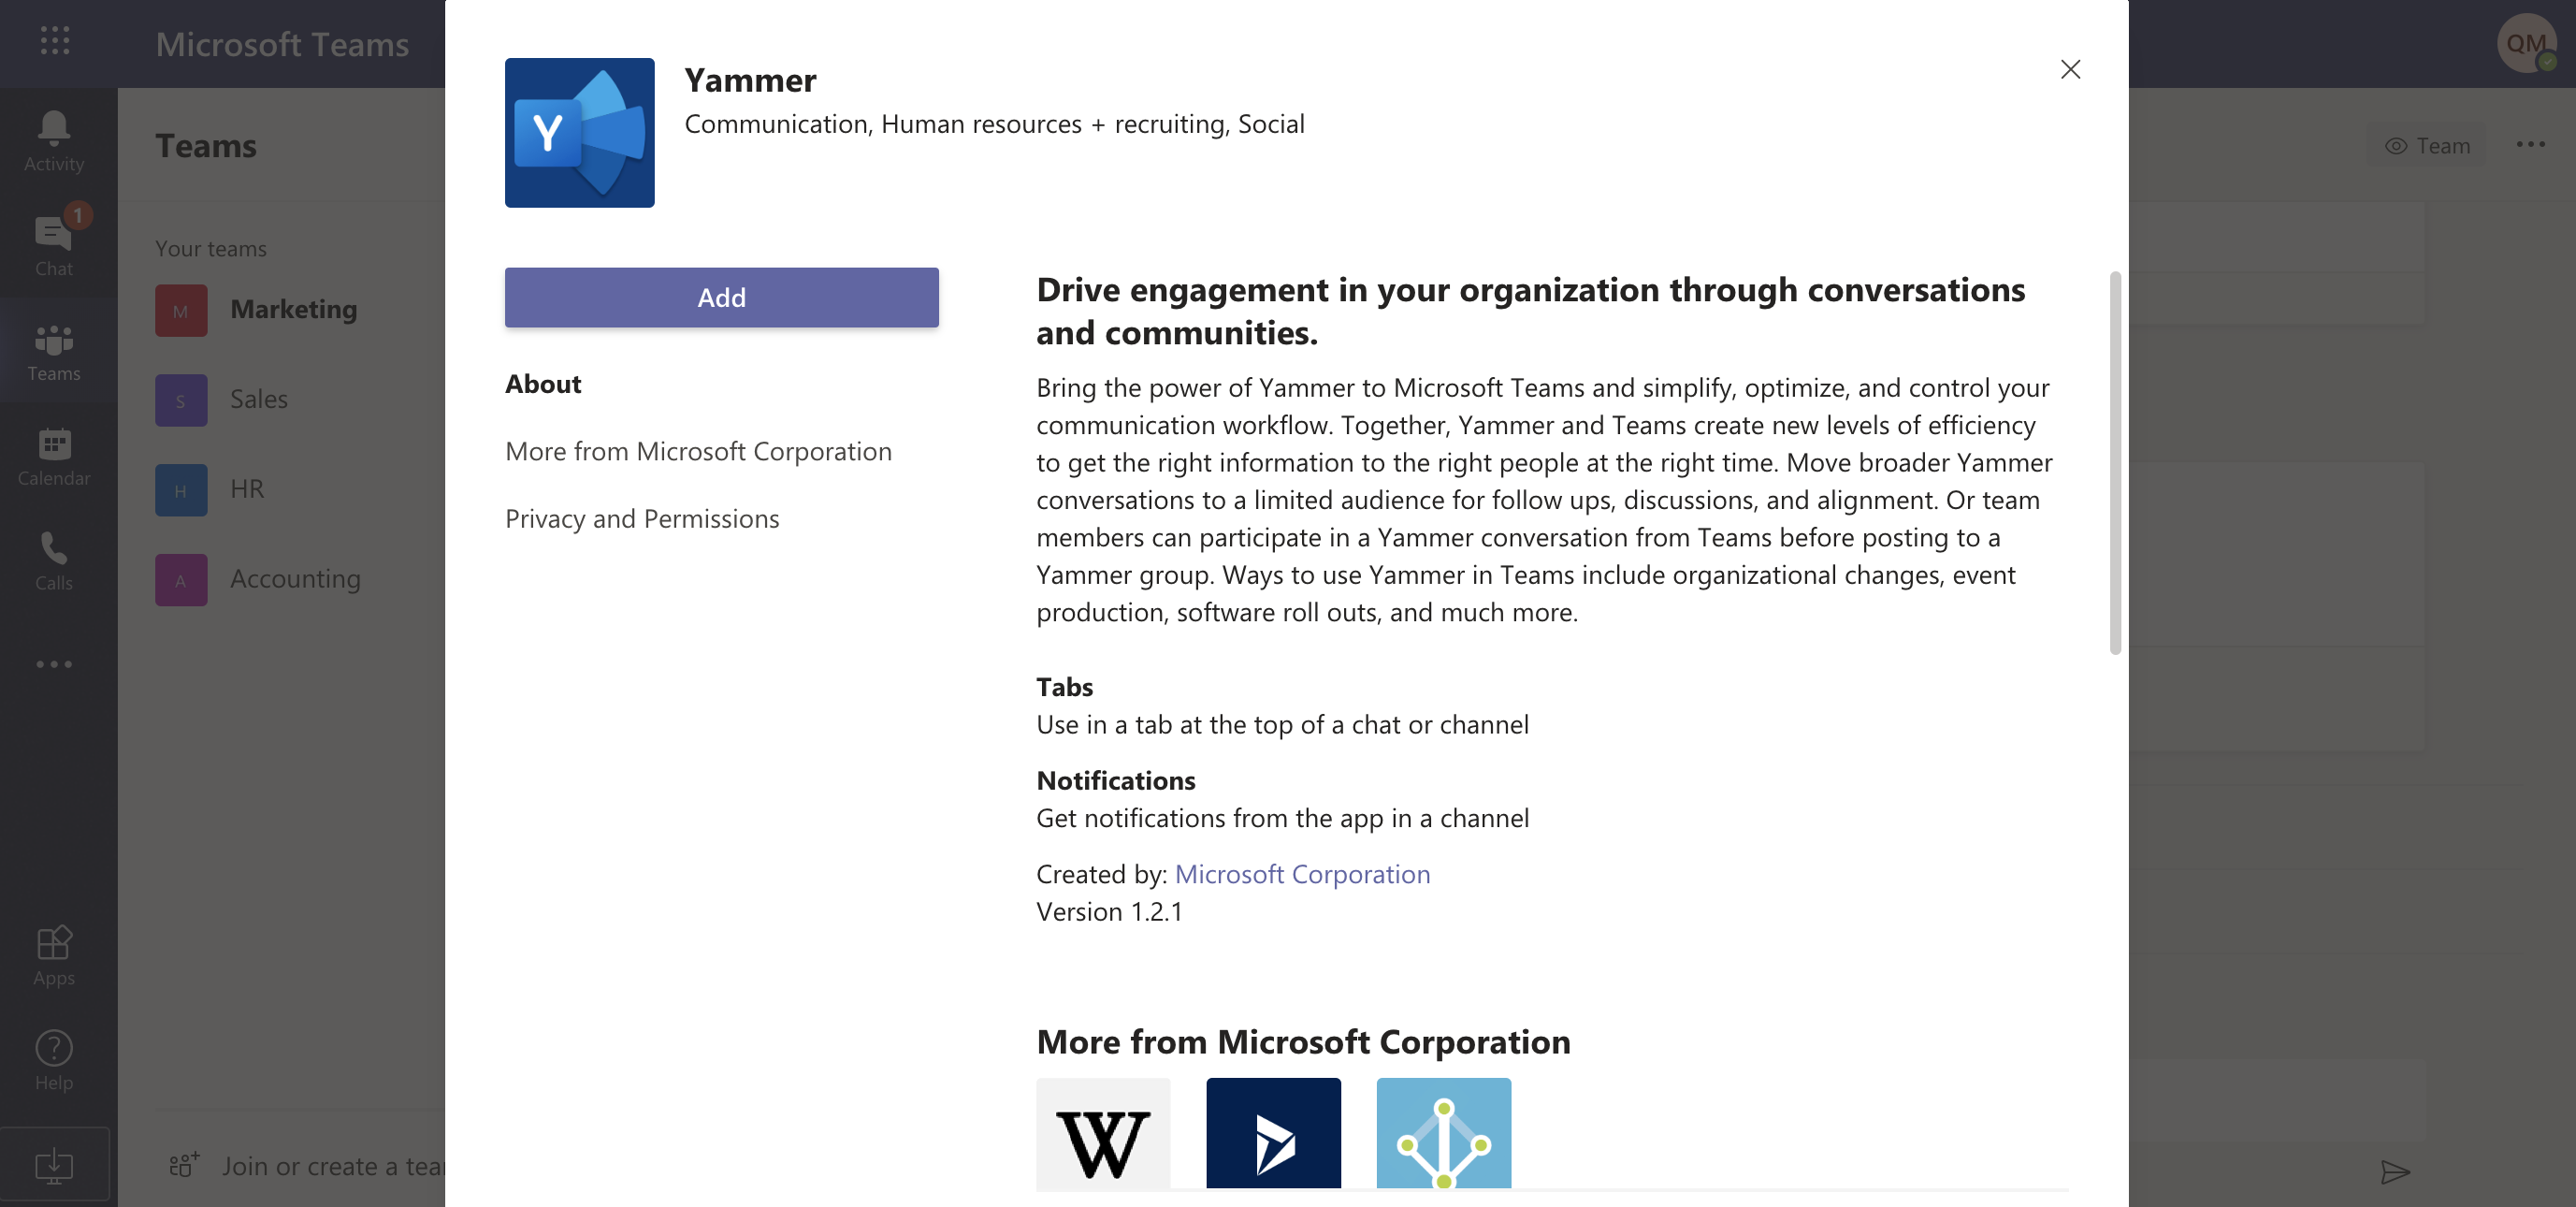 Search for Yammer, then click Add.